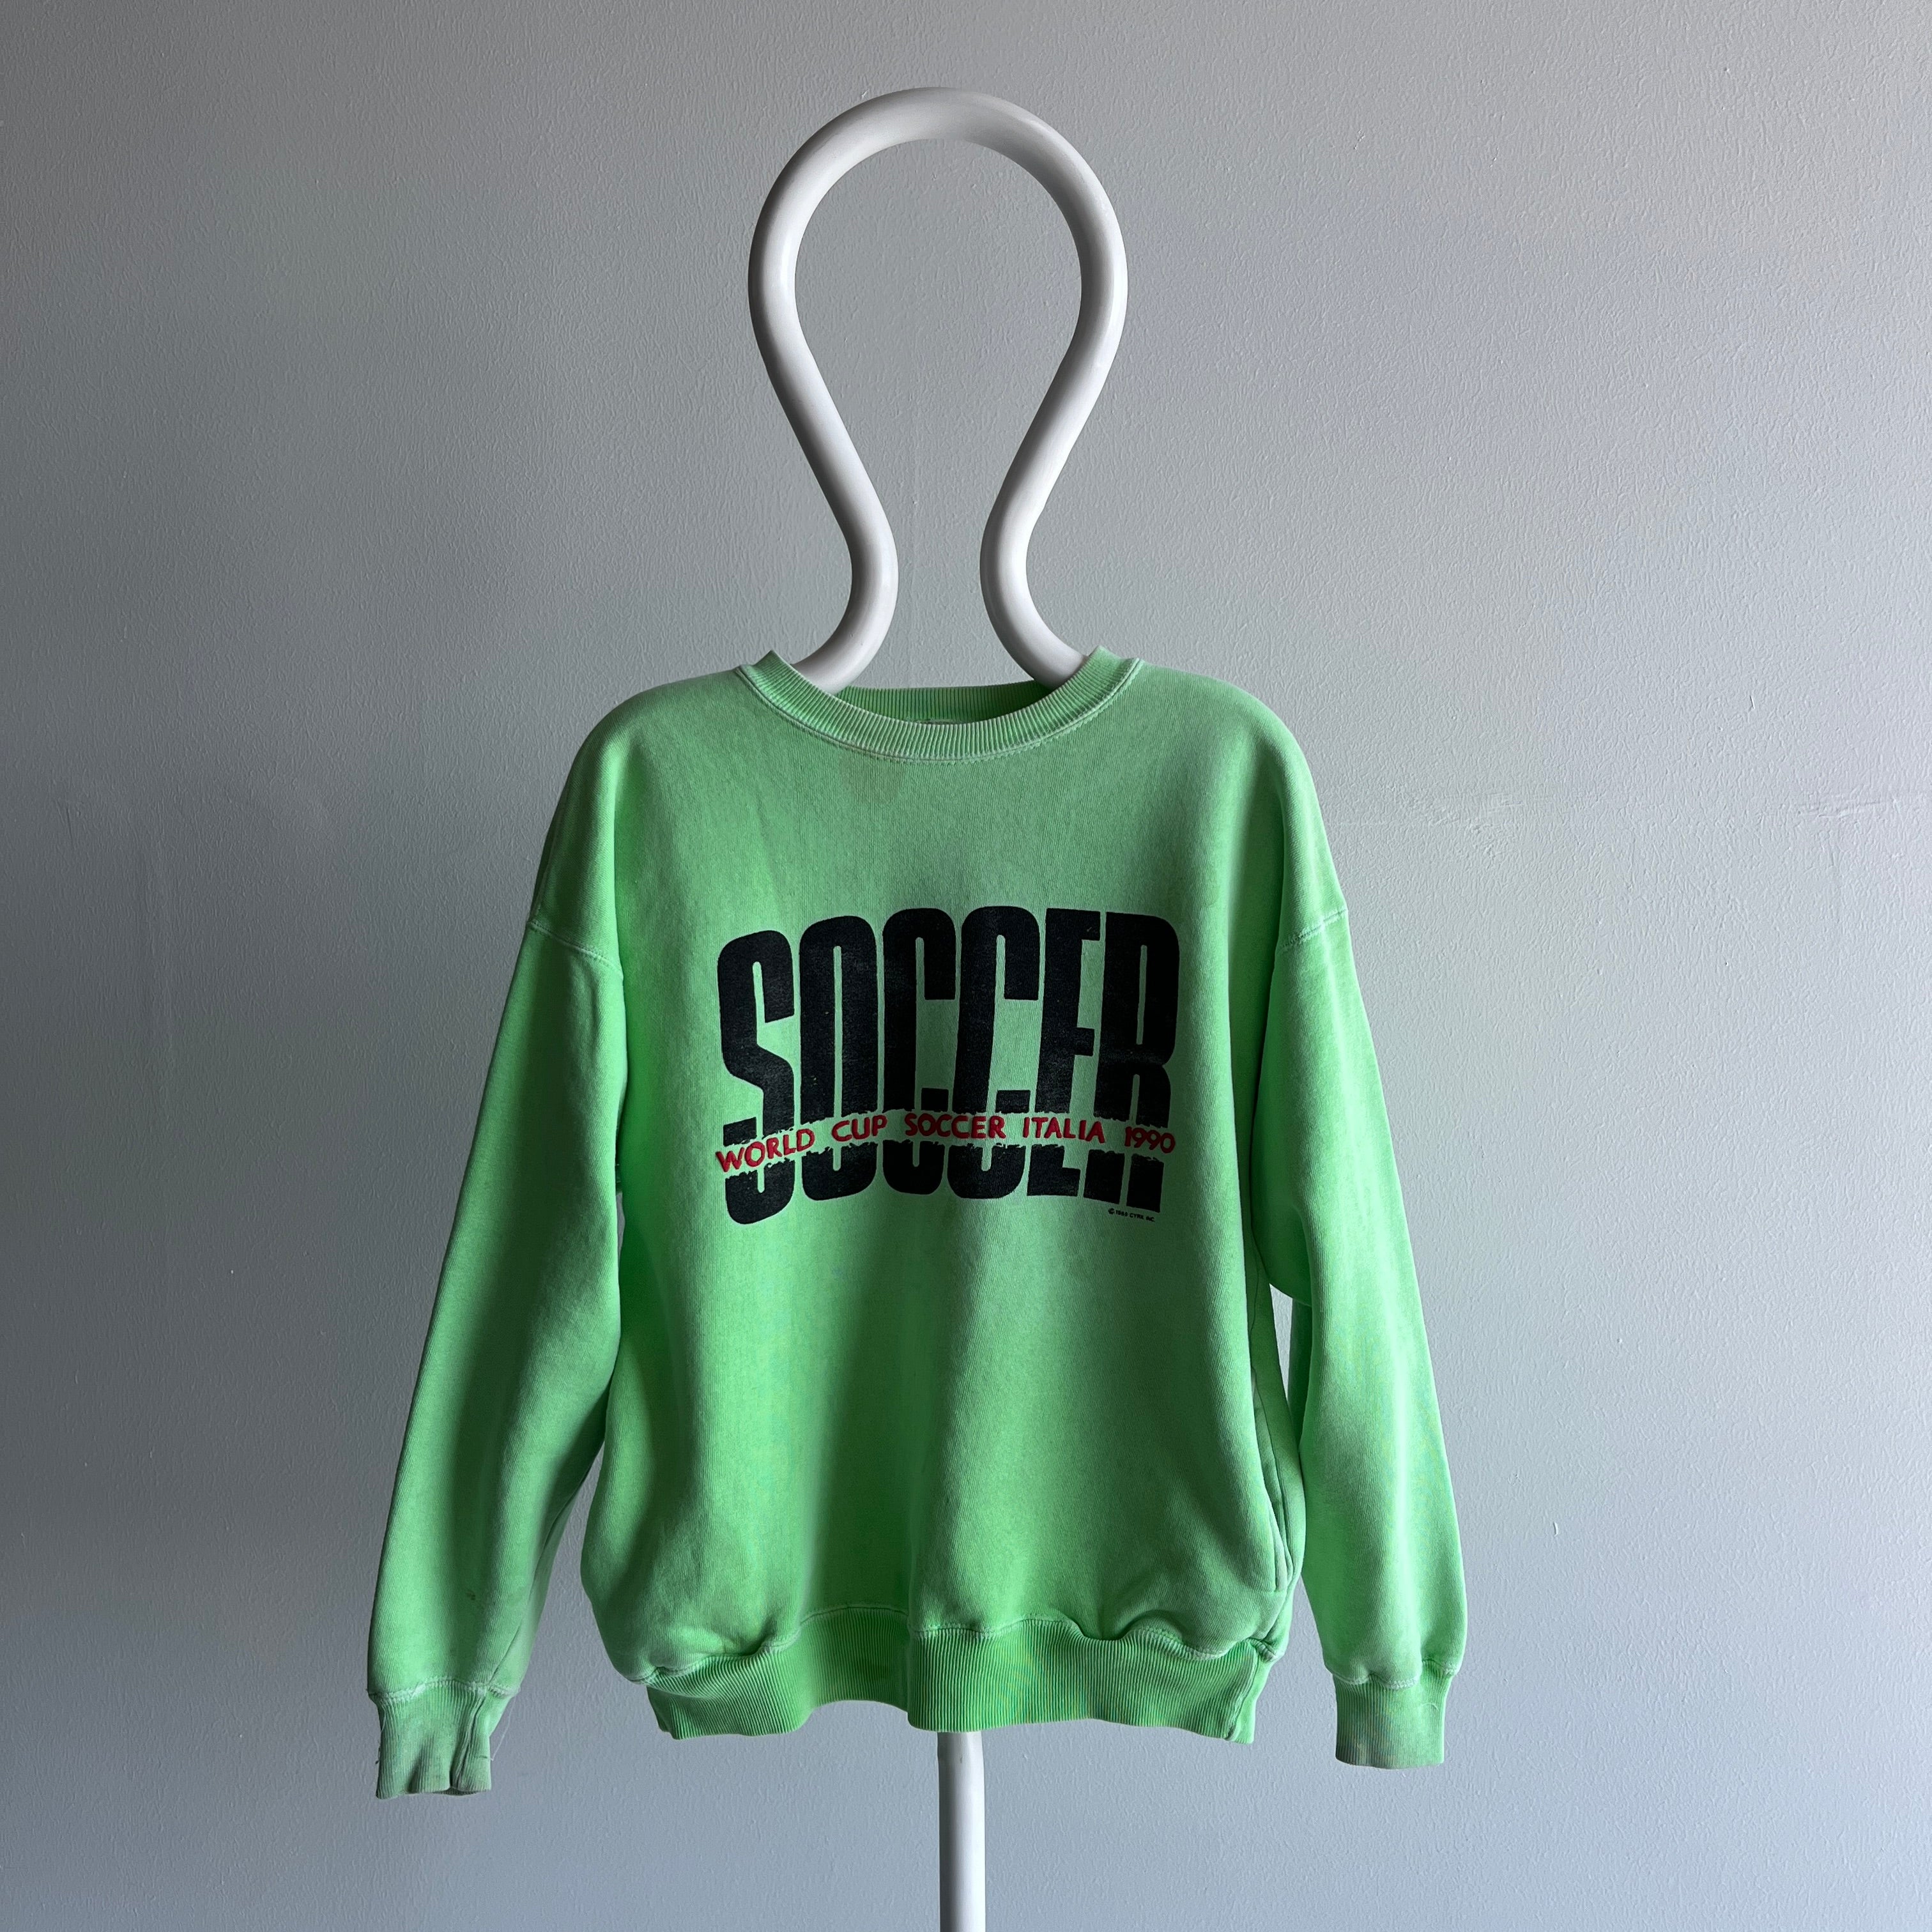 1989/90 World Cup Soccer Italia Front and Back Sweatshirt with Pockets